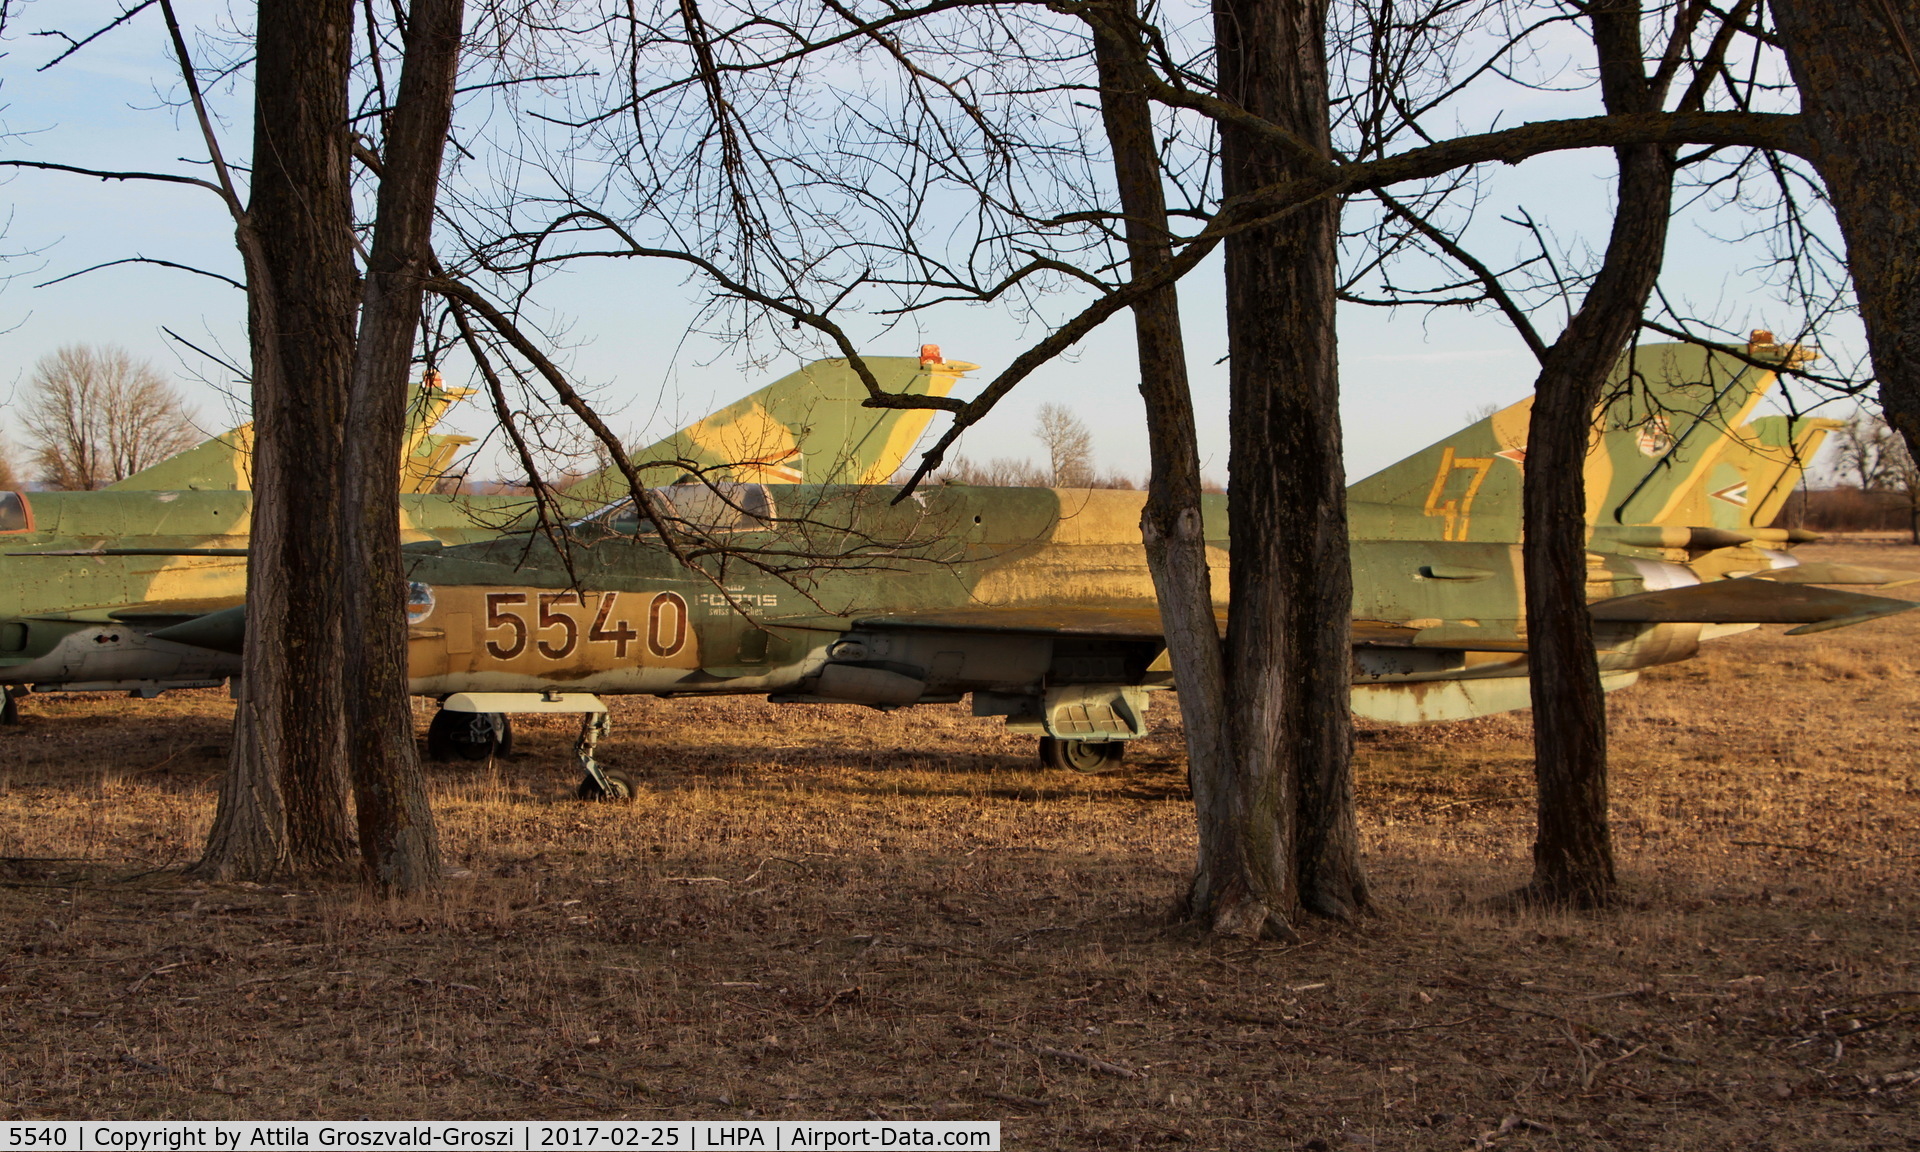 5540, Mikoyan-Gurevich MiG-21bis C/N 75035540, Pápa stored off-site airport, Hungary